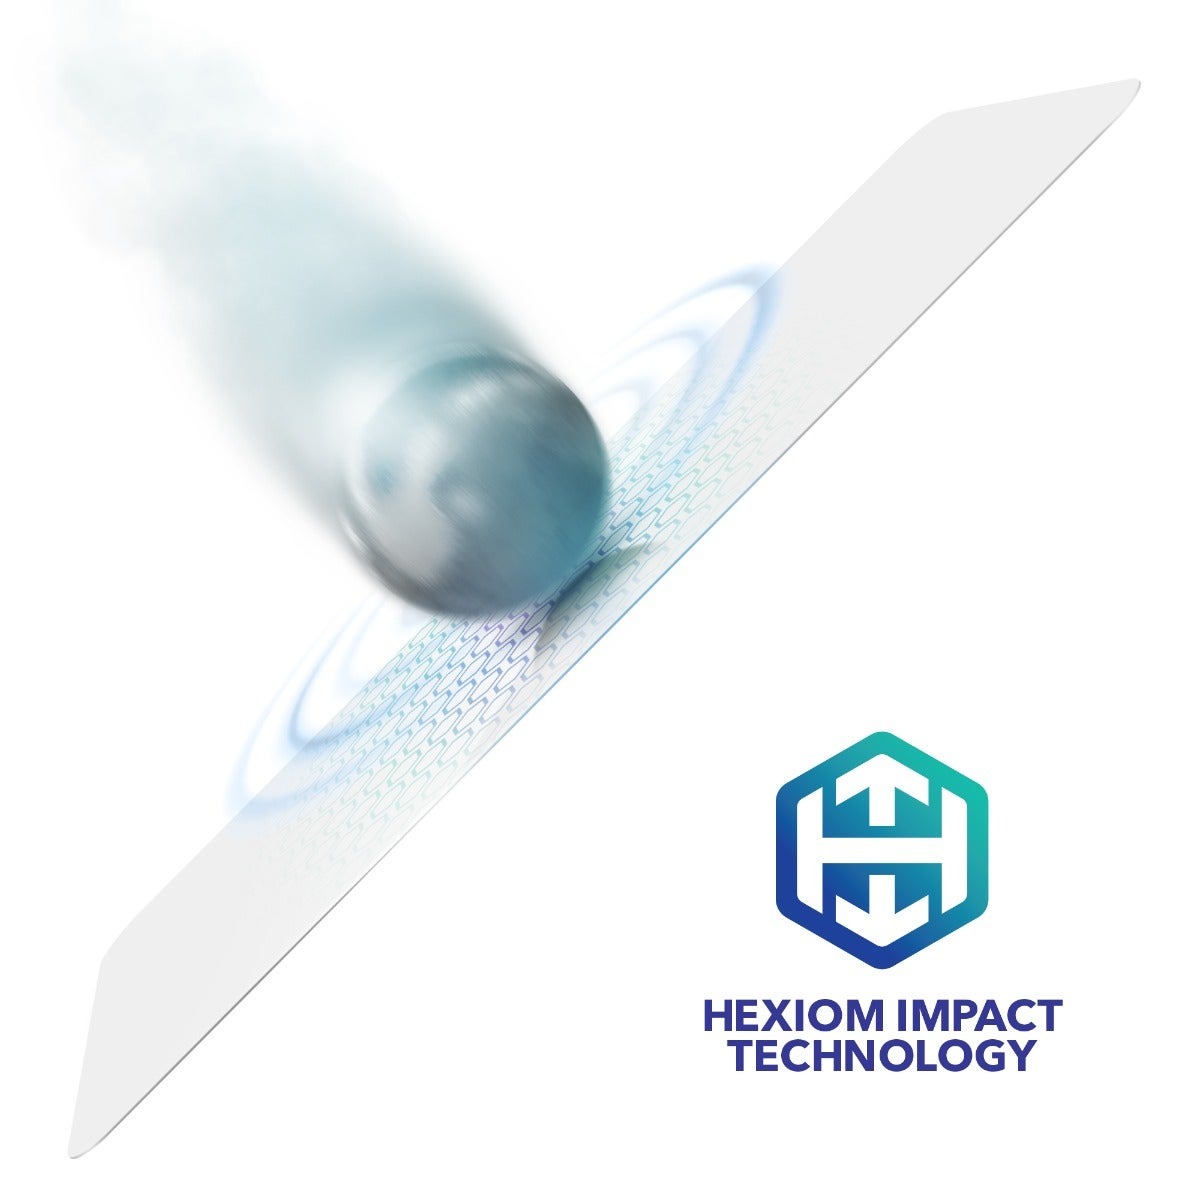 Advanced Impact Protection||
Shock-absorbing Hexiom impact technology has an adhesive, honey-comb-like structure that strengthens the screen protector.